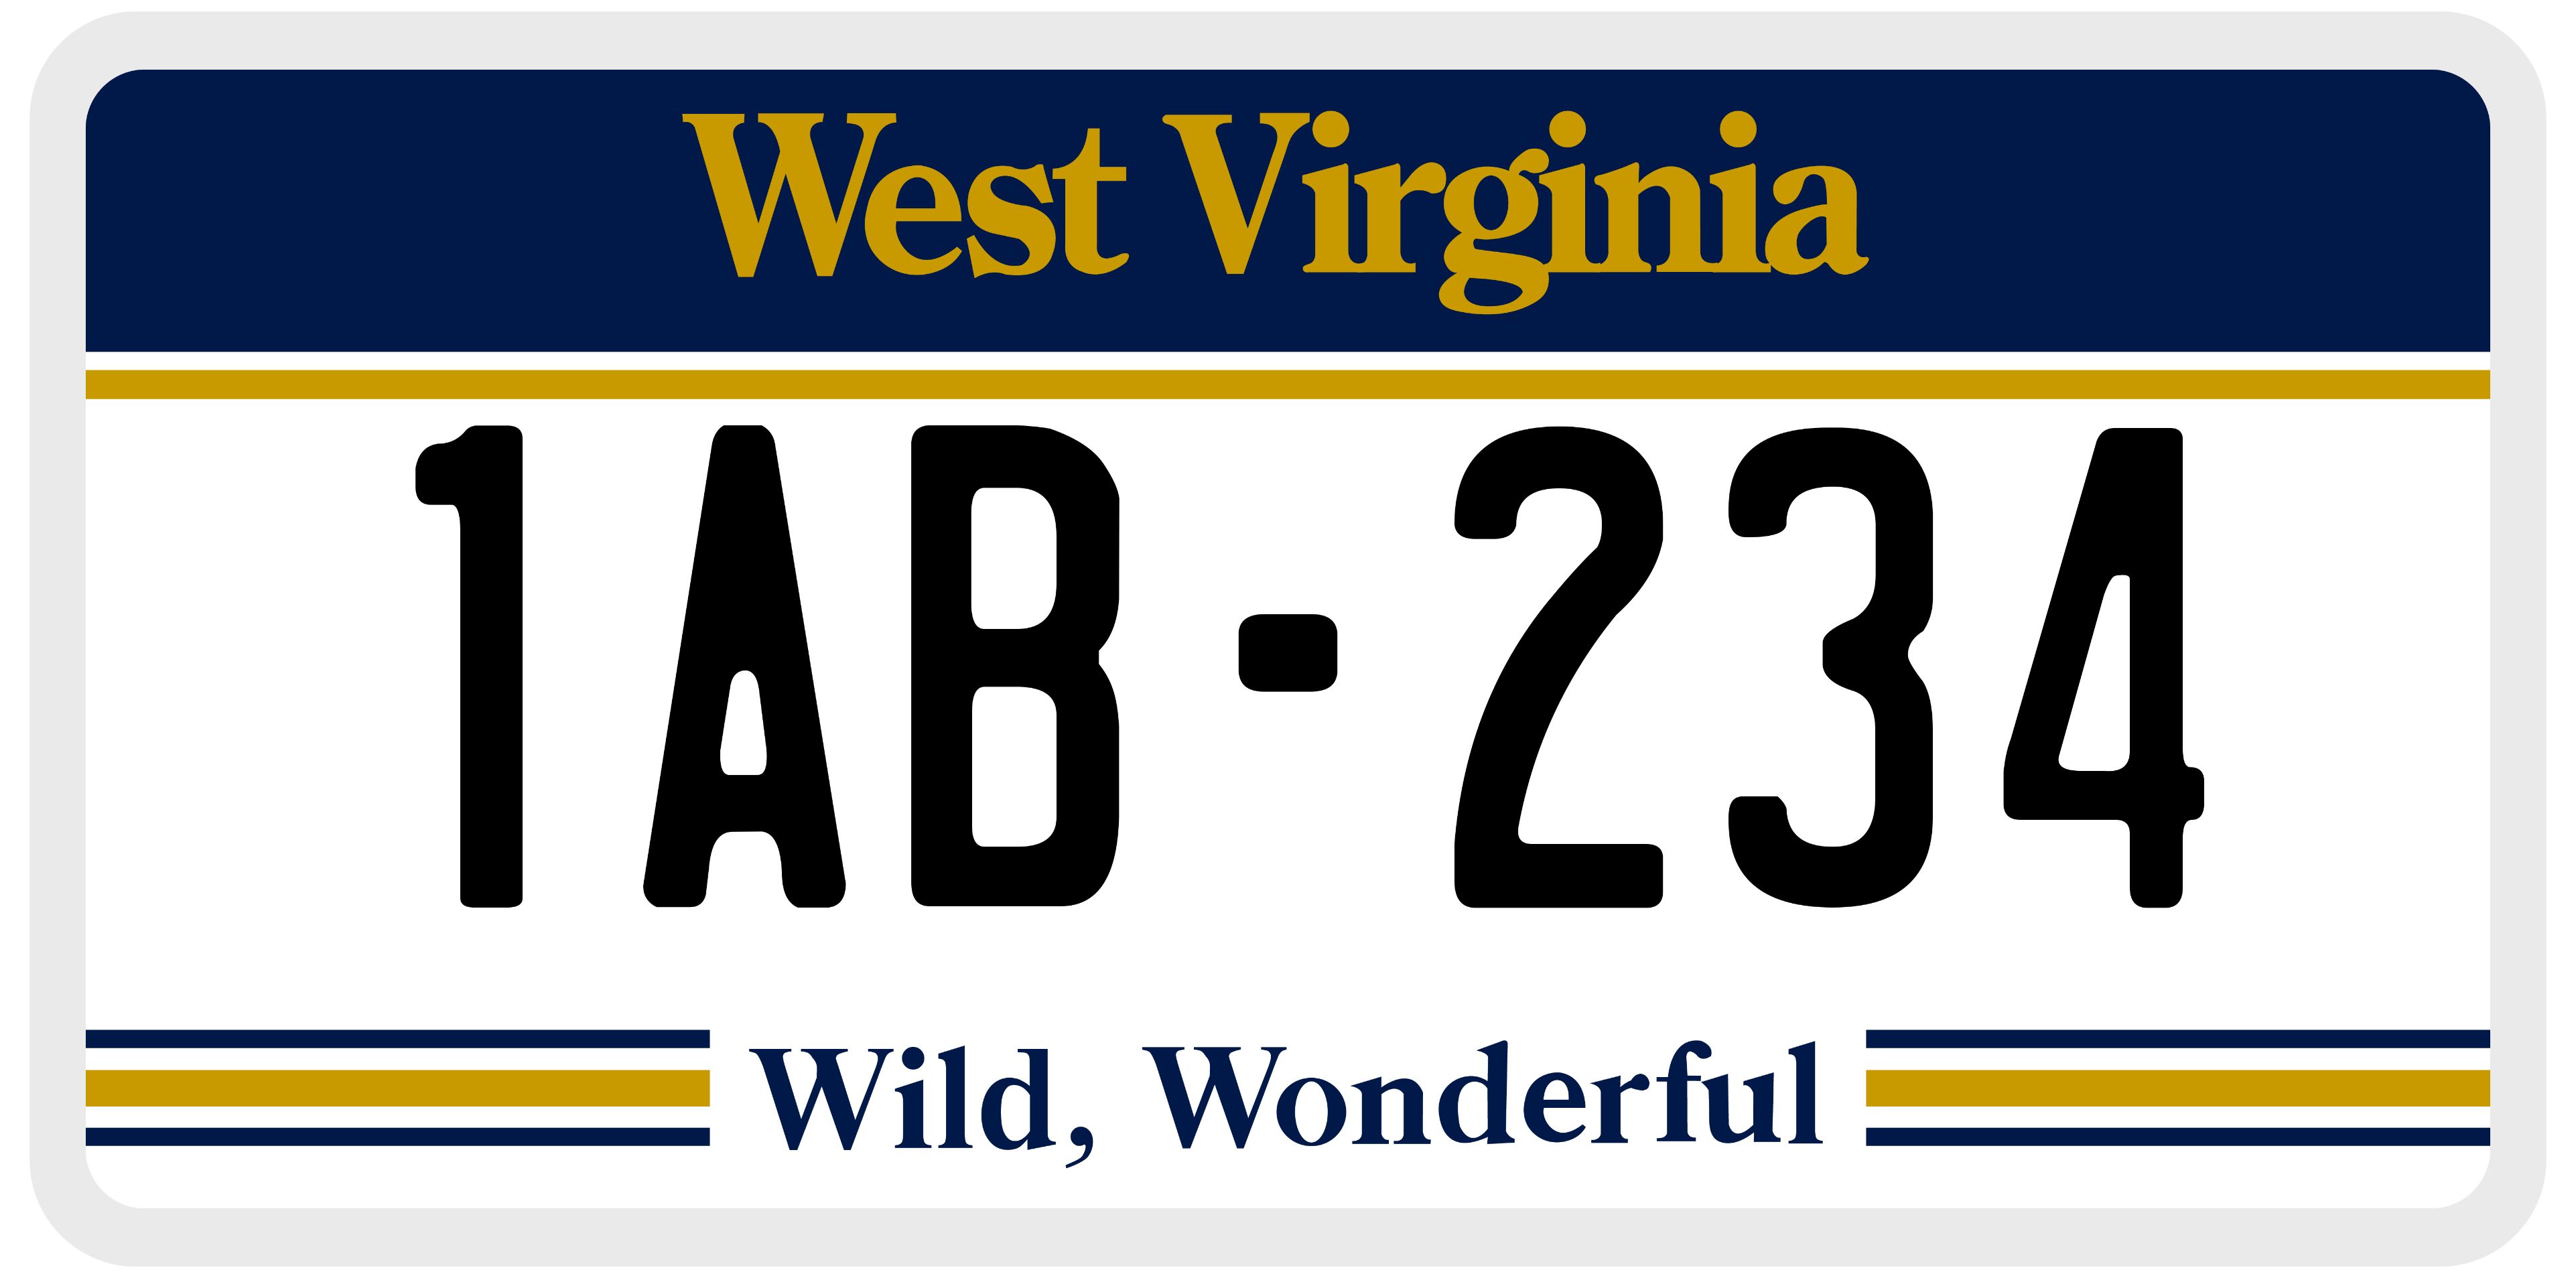 What does a West Virginia license plate look like